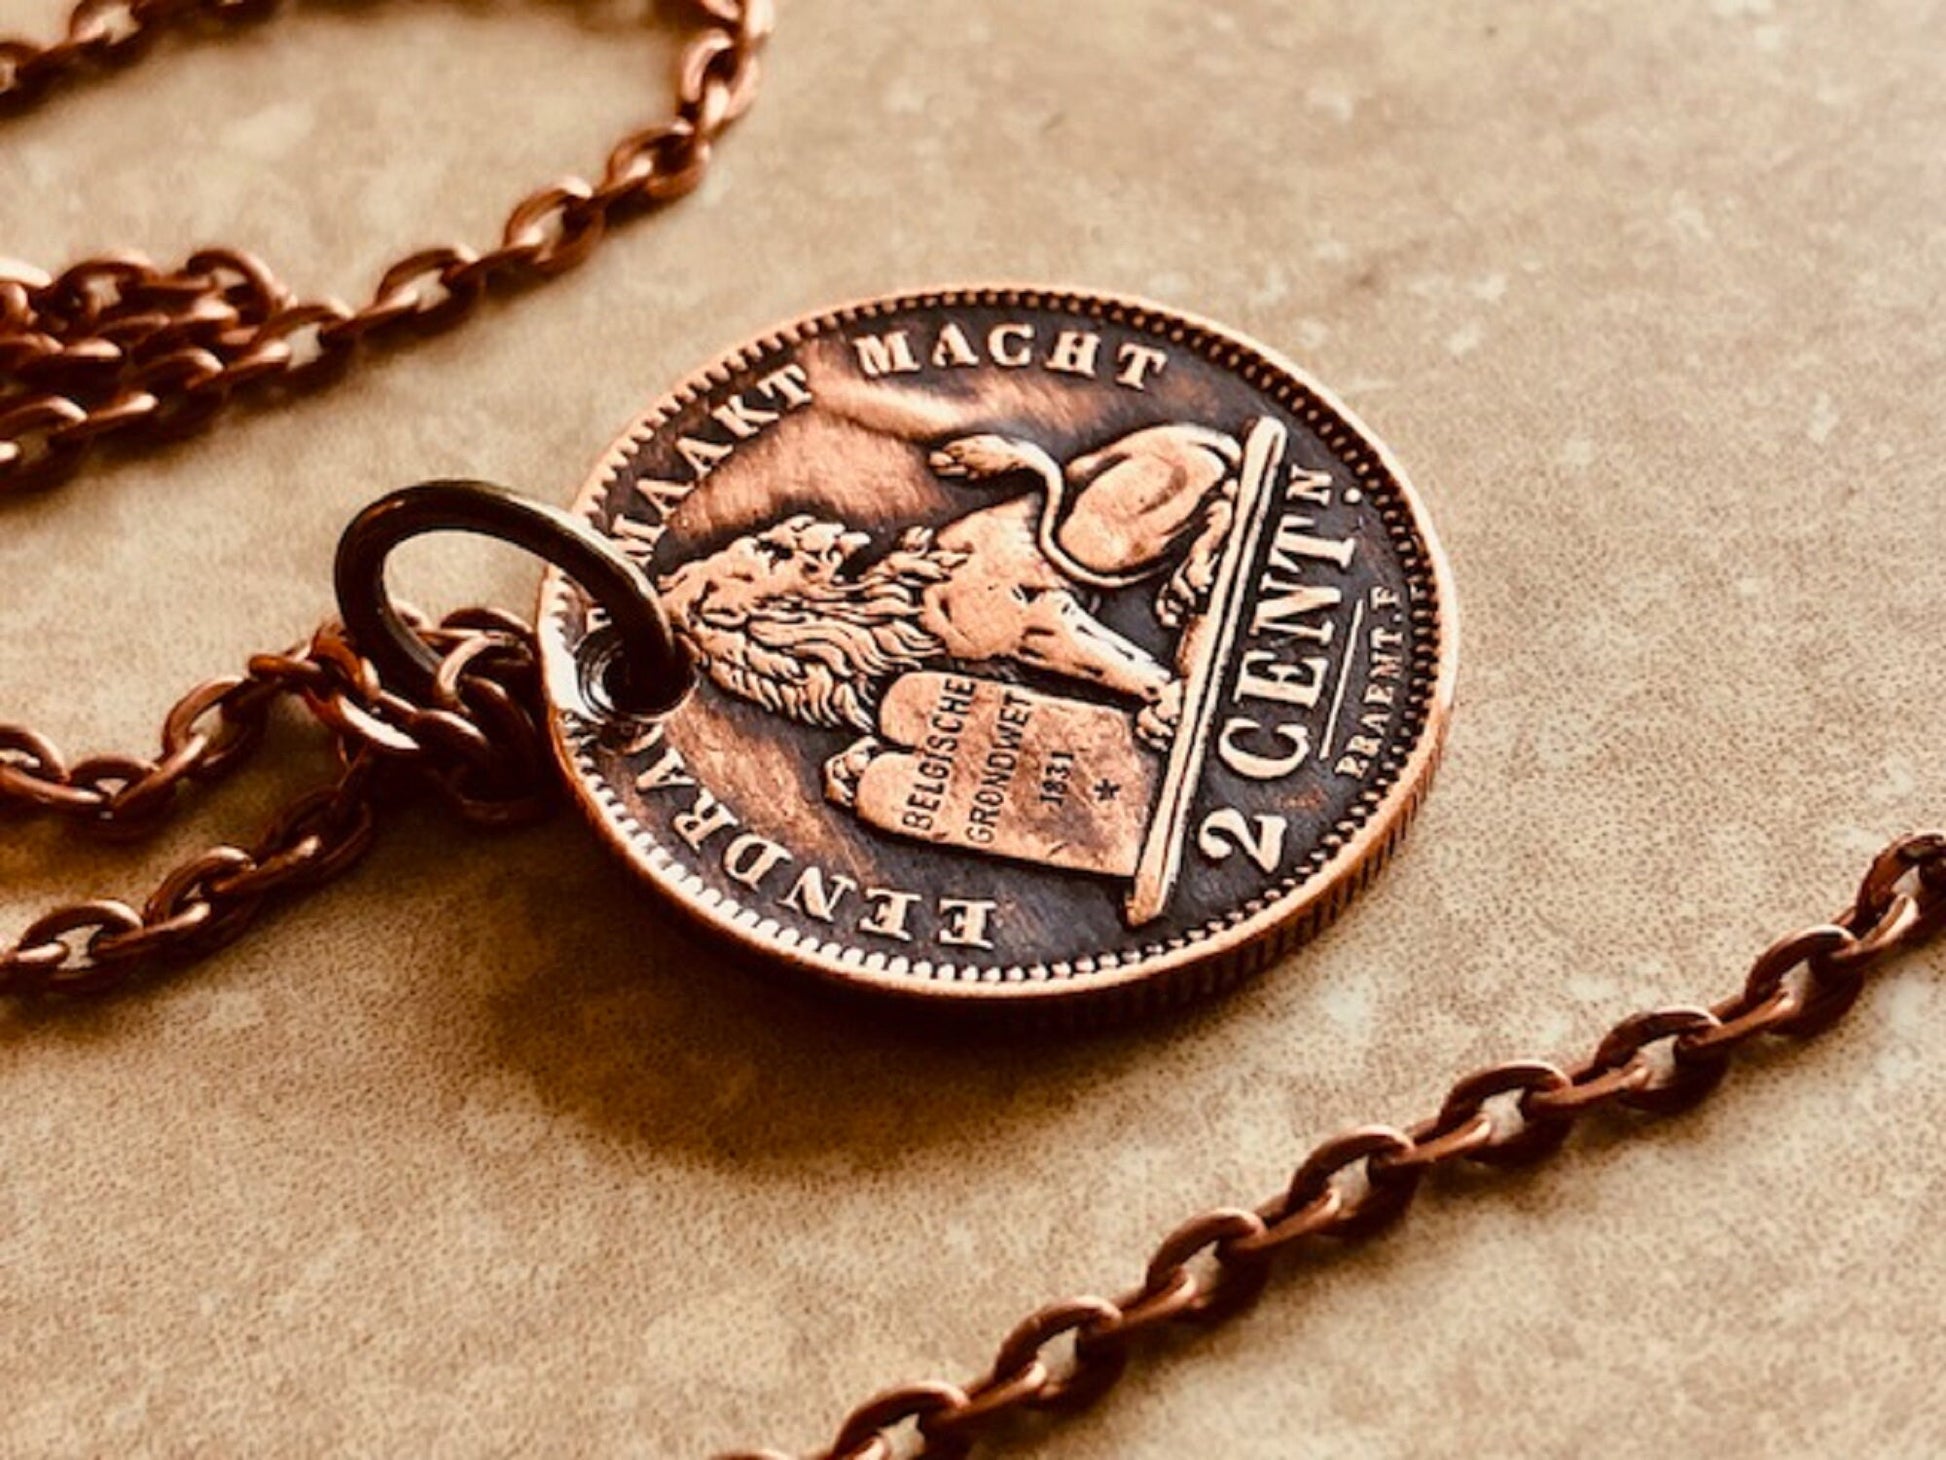 Belgium Coin Necklace 2 Cents Jewelry Pendant Personal Old Vintage Handmade Jewelry Gift Friend Charm For Him Her World Coin Collector